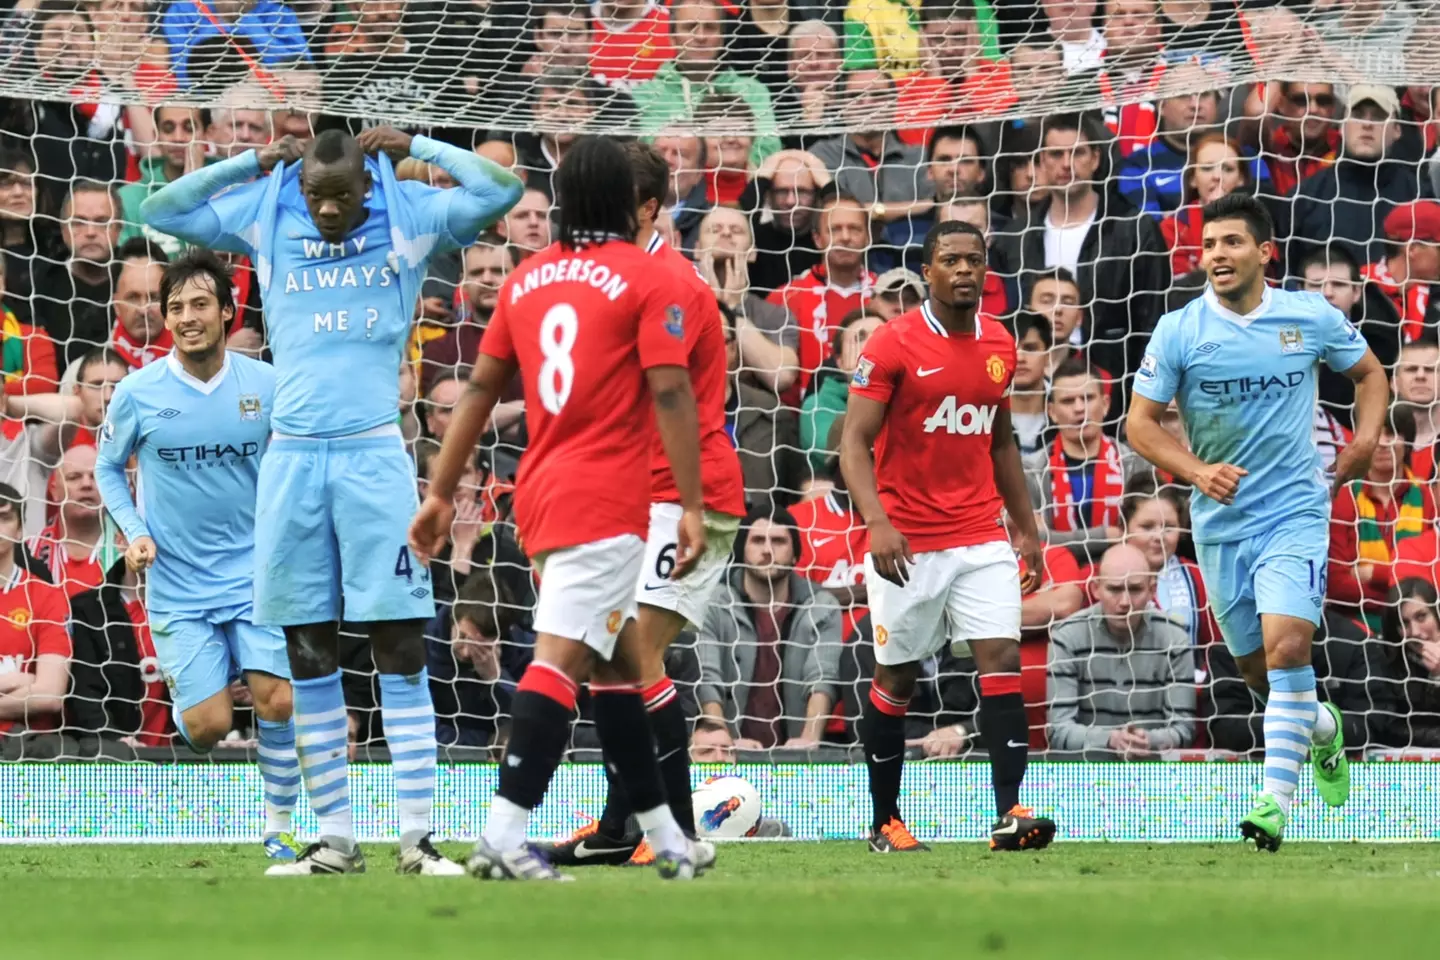 Balotelli's most famous moment in the Premier League. Image: PA Images